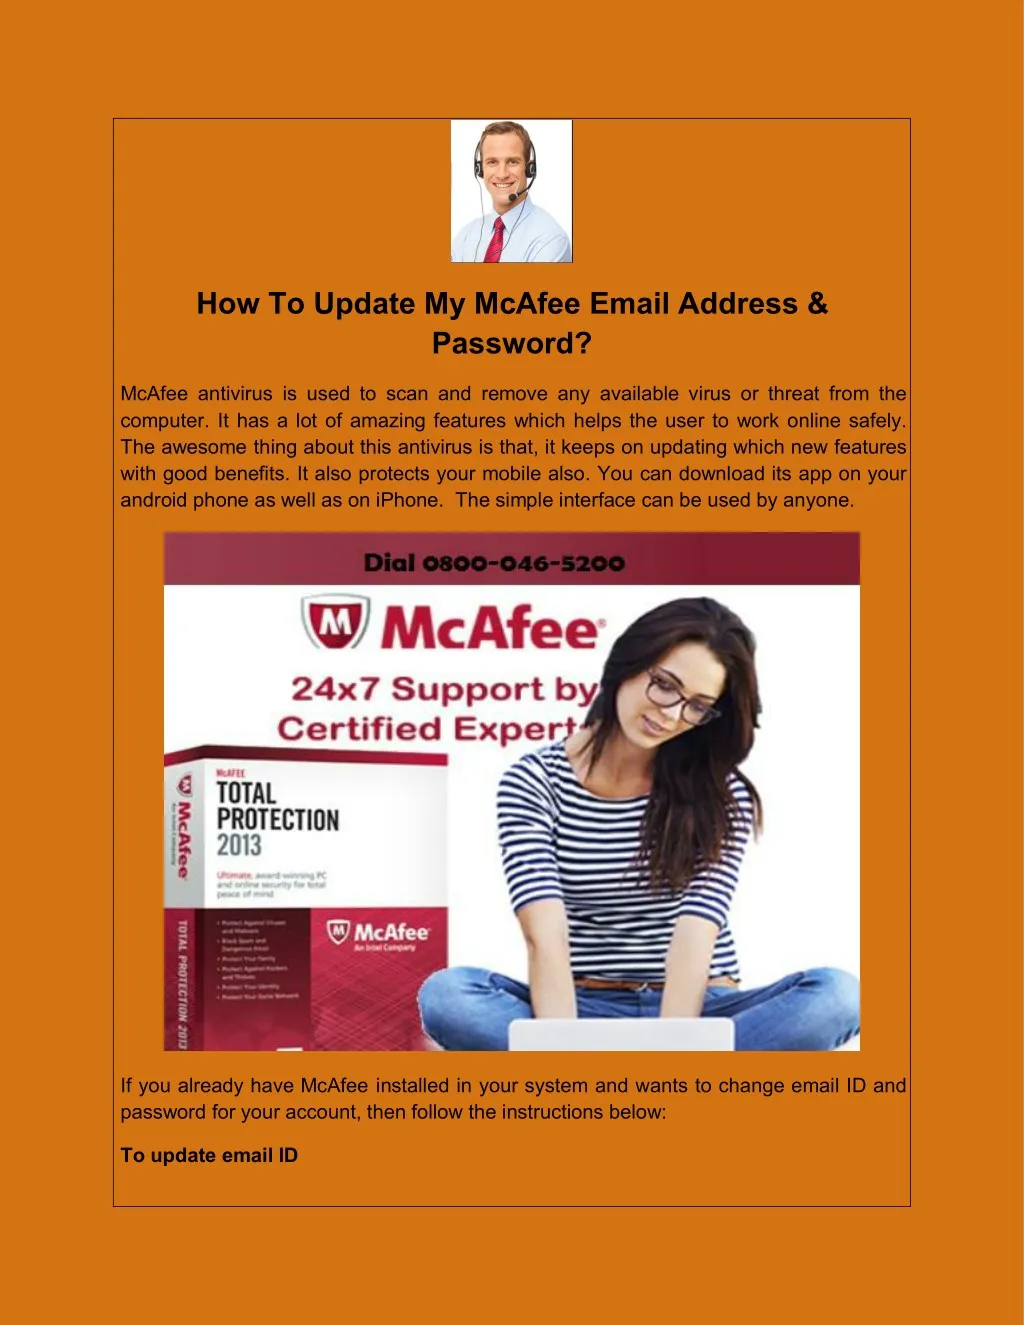 how to update my mcafee email address password